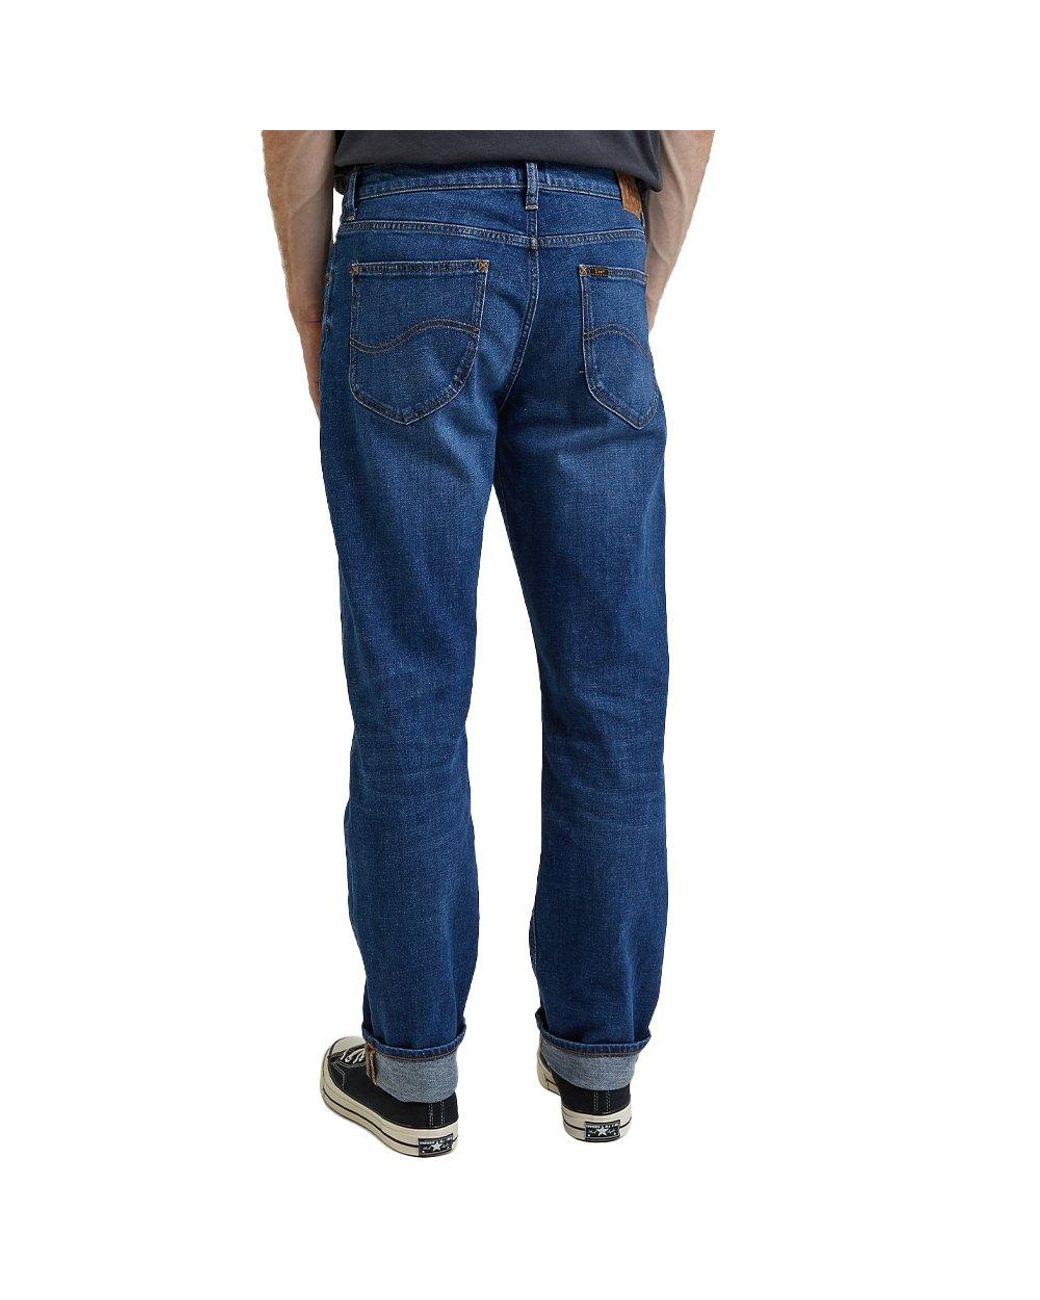 West Blue | in Fit Men Lee Jeans Relaxed Lyst Jeans for